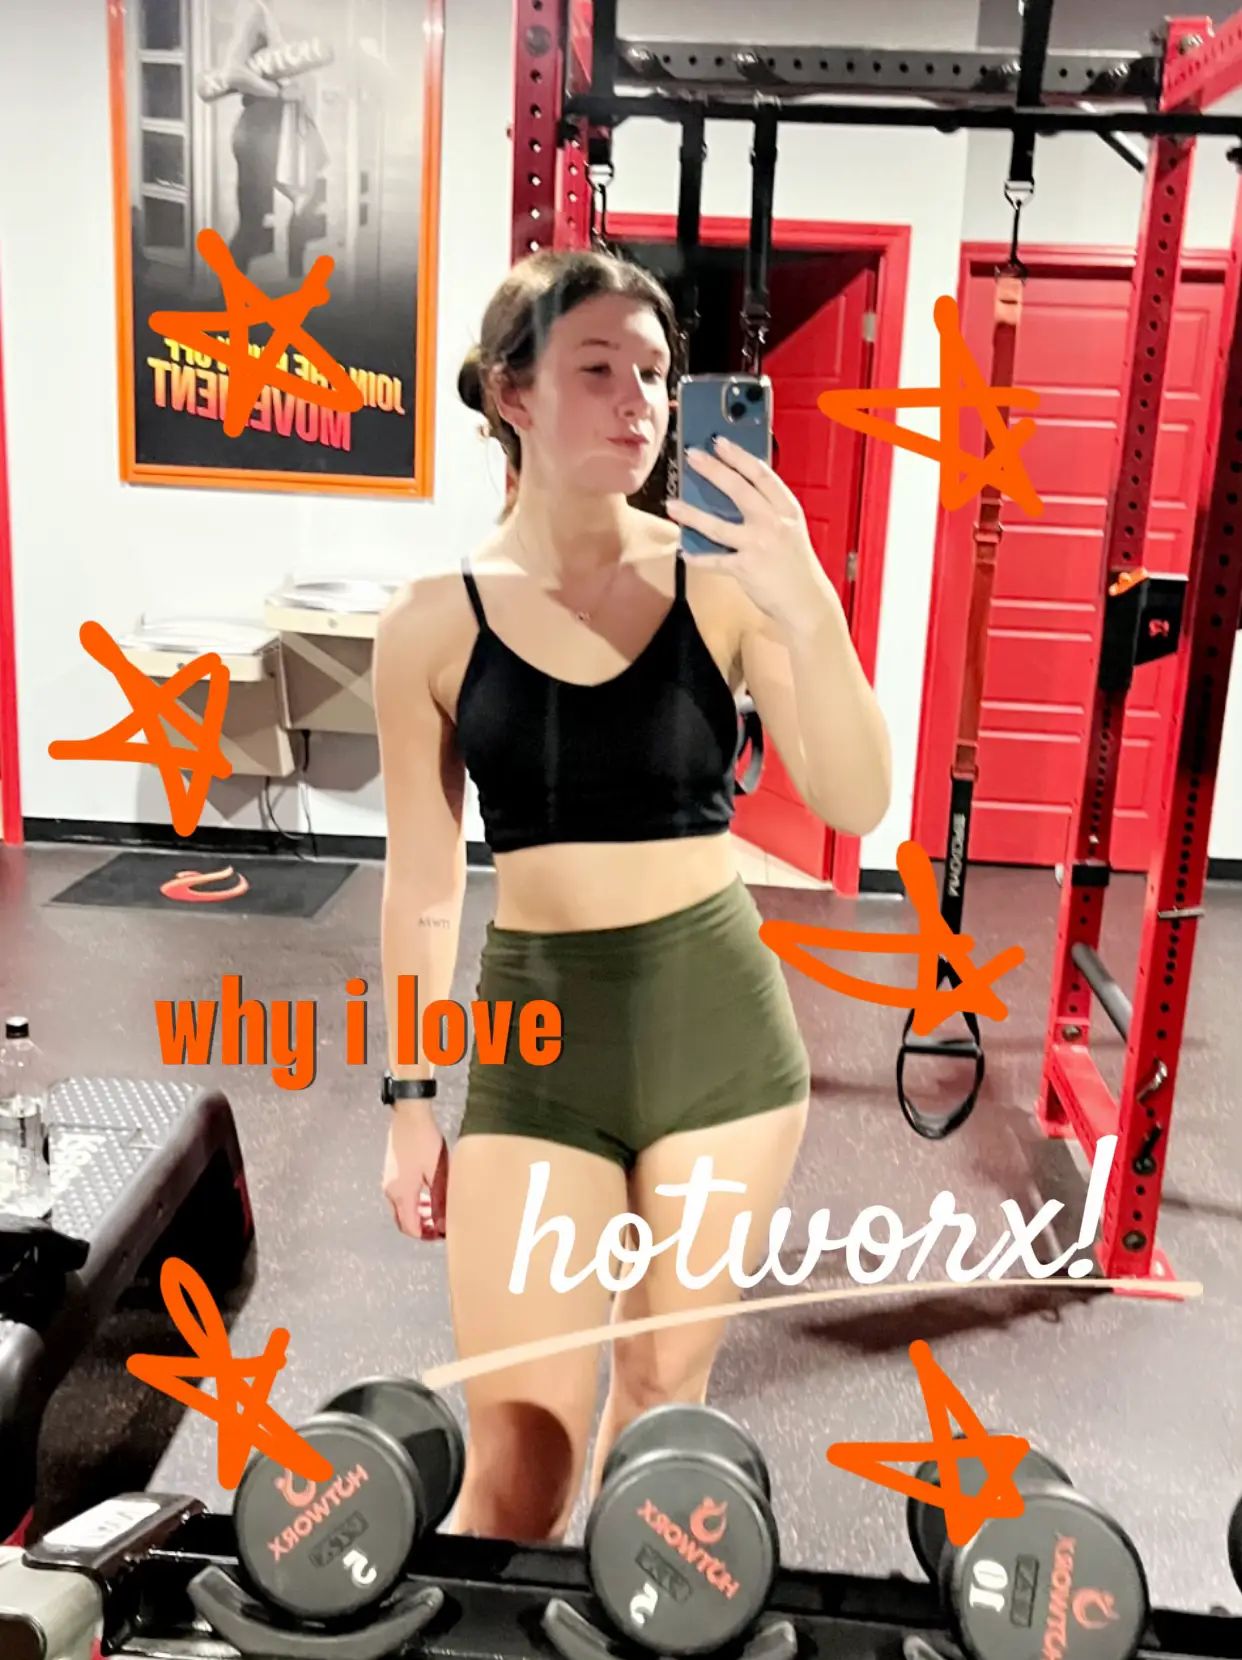 HOTWORX - HIIT, Gallery posted by Quaezsha Arnold